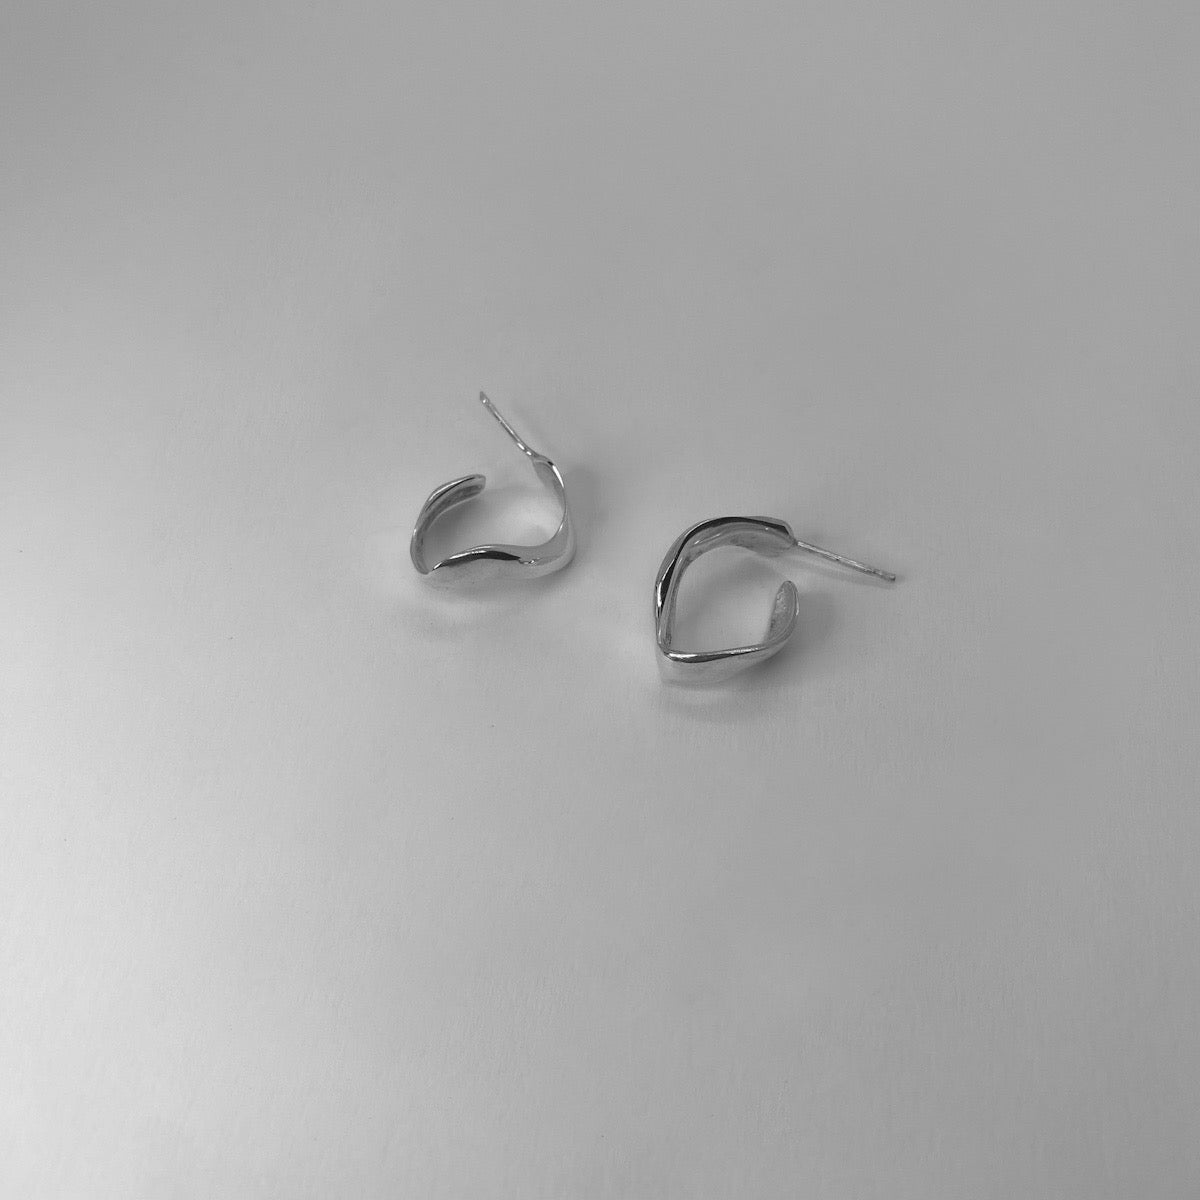 Handmade wavy oval-shaped hoops crafted from sterling silver 925